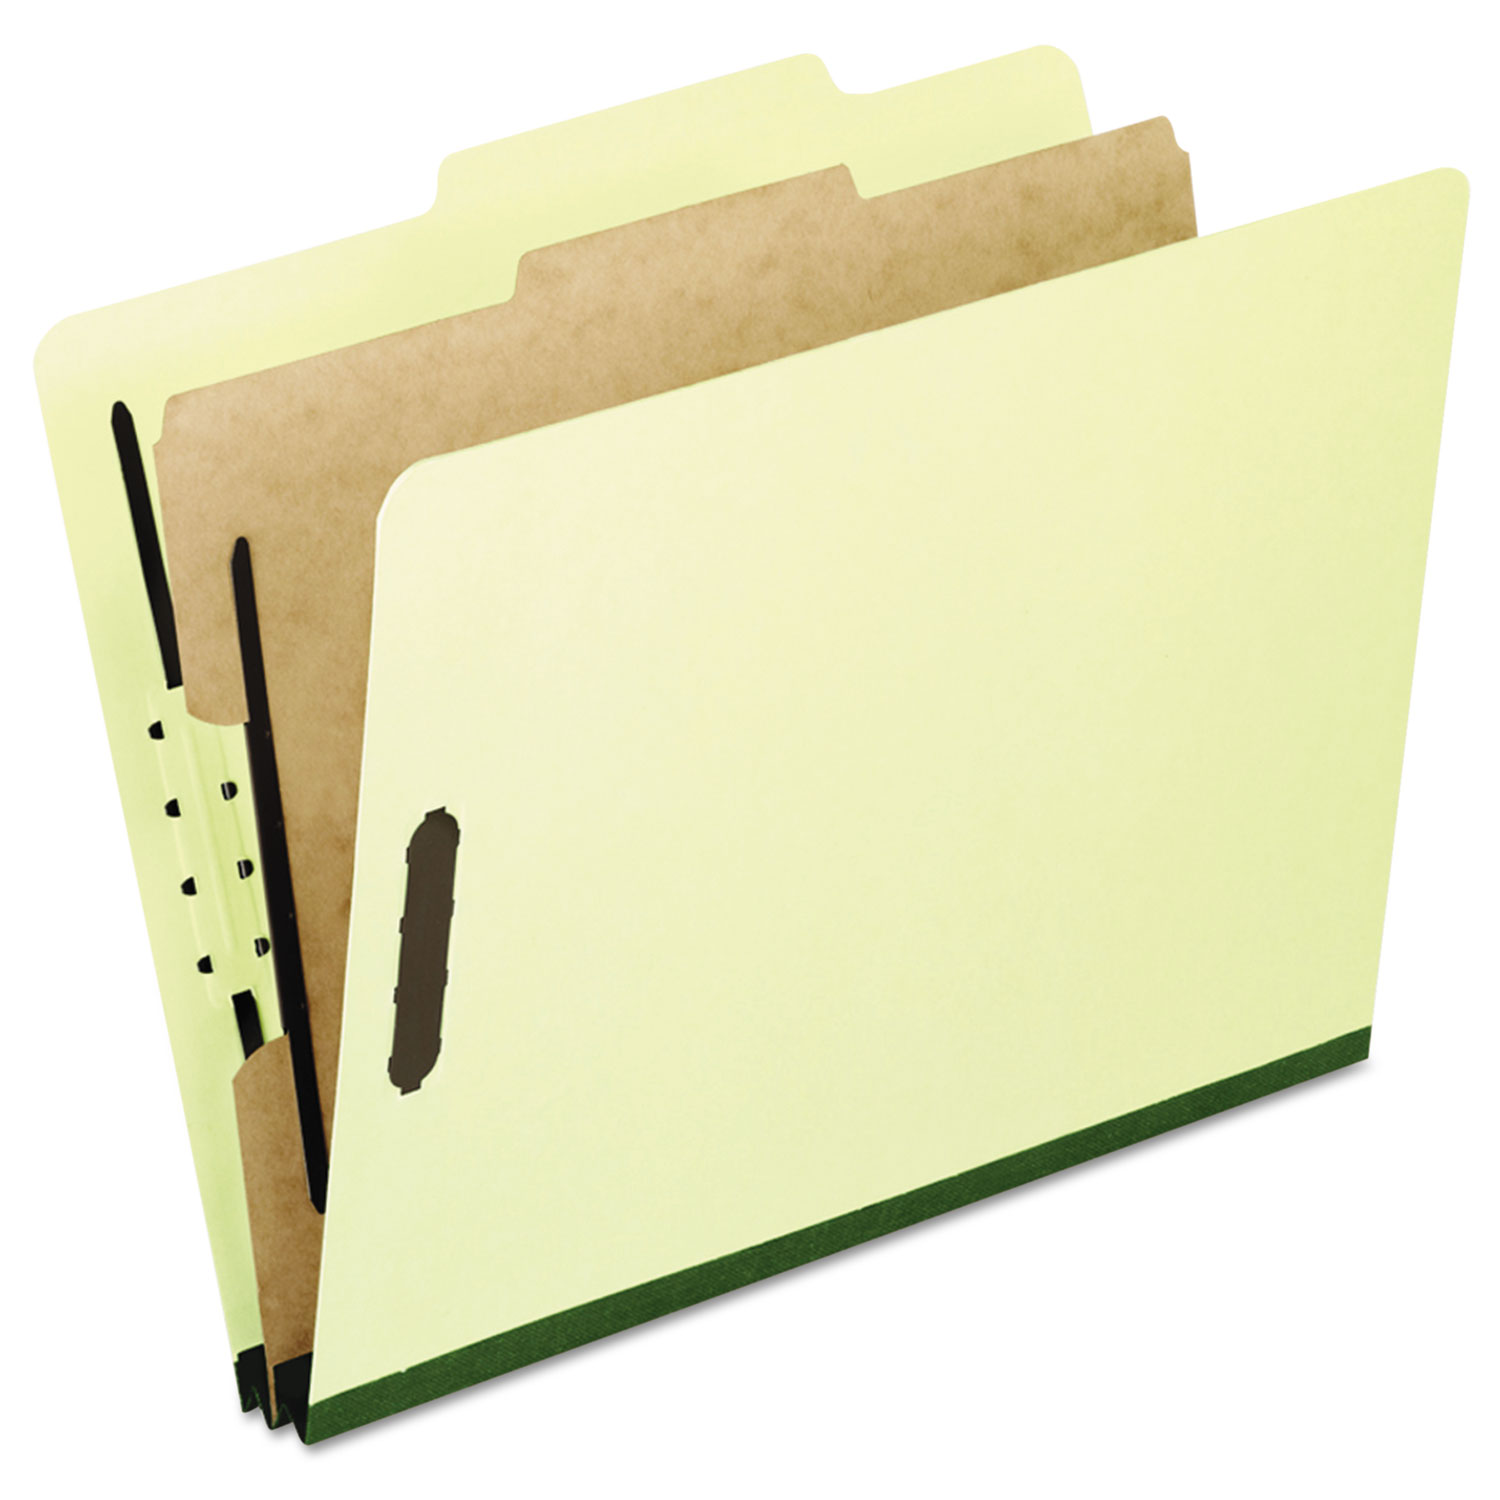  Pendaflex 2157G Four-, Six-, and Eight-Section Pressboard Classification Folders, 1 Divider, Embedded Fasteners, Legal, Light Green, 10/Box (PFX2157G) 